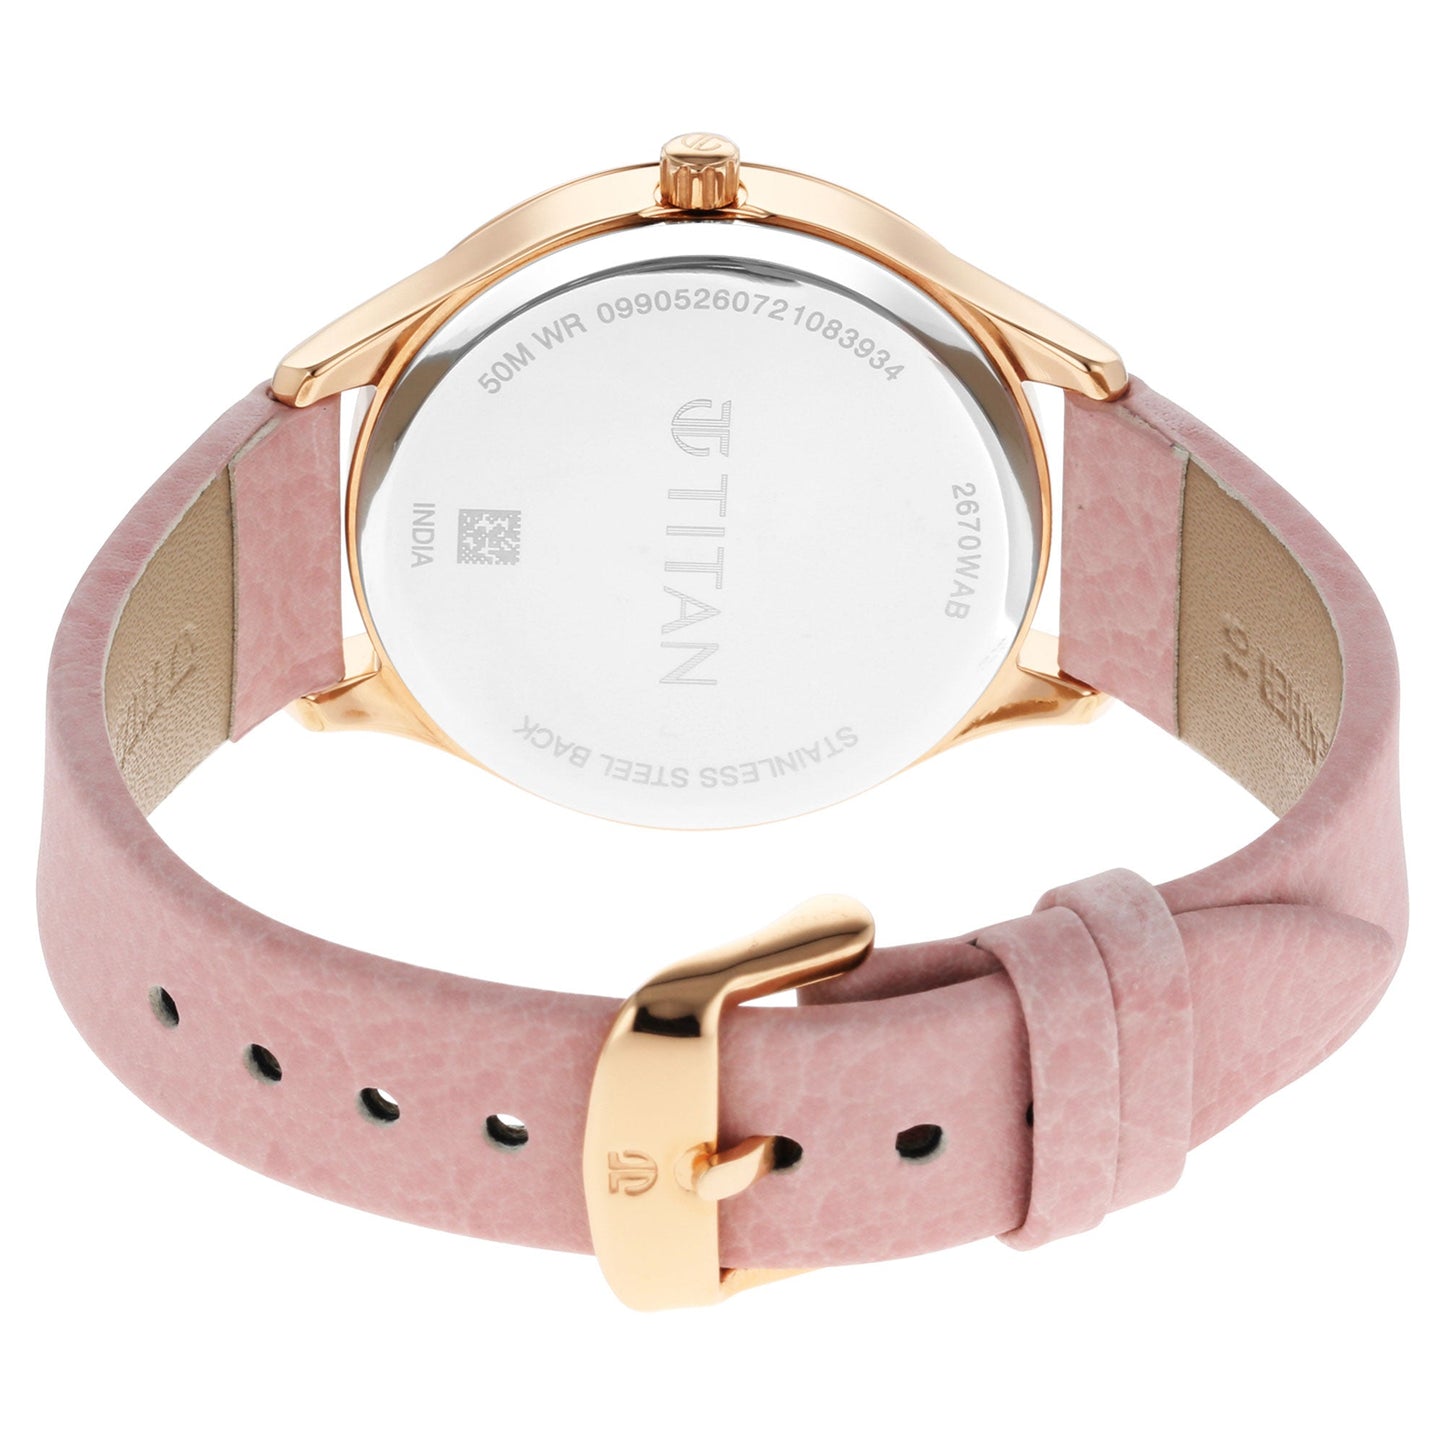 Titan Pastel Dreams Pink Mother of Pearl Dial Analog Leather Strap Watch for Women